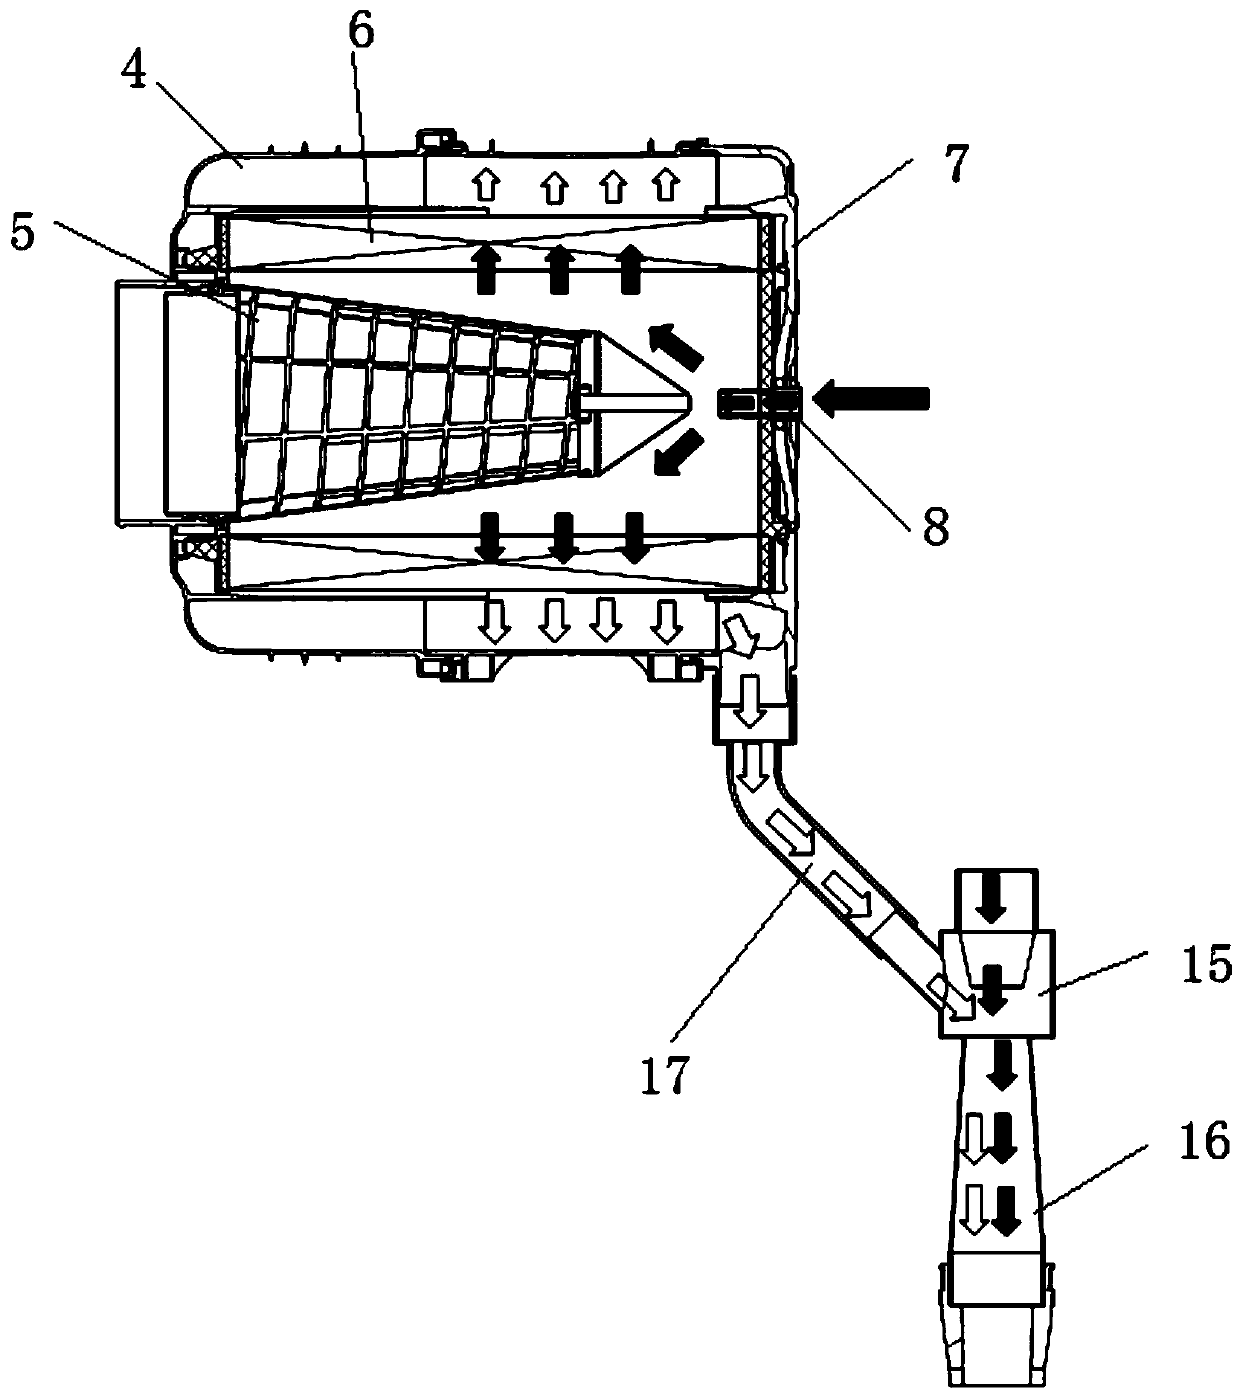 Air filter system having self-cleaning function